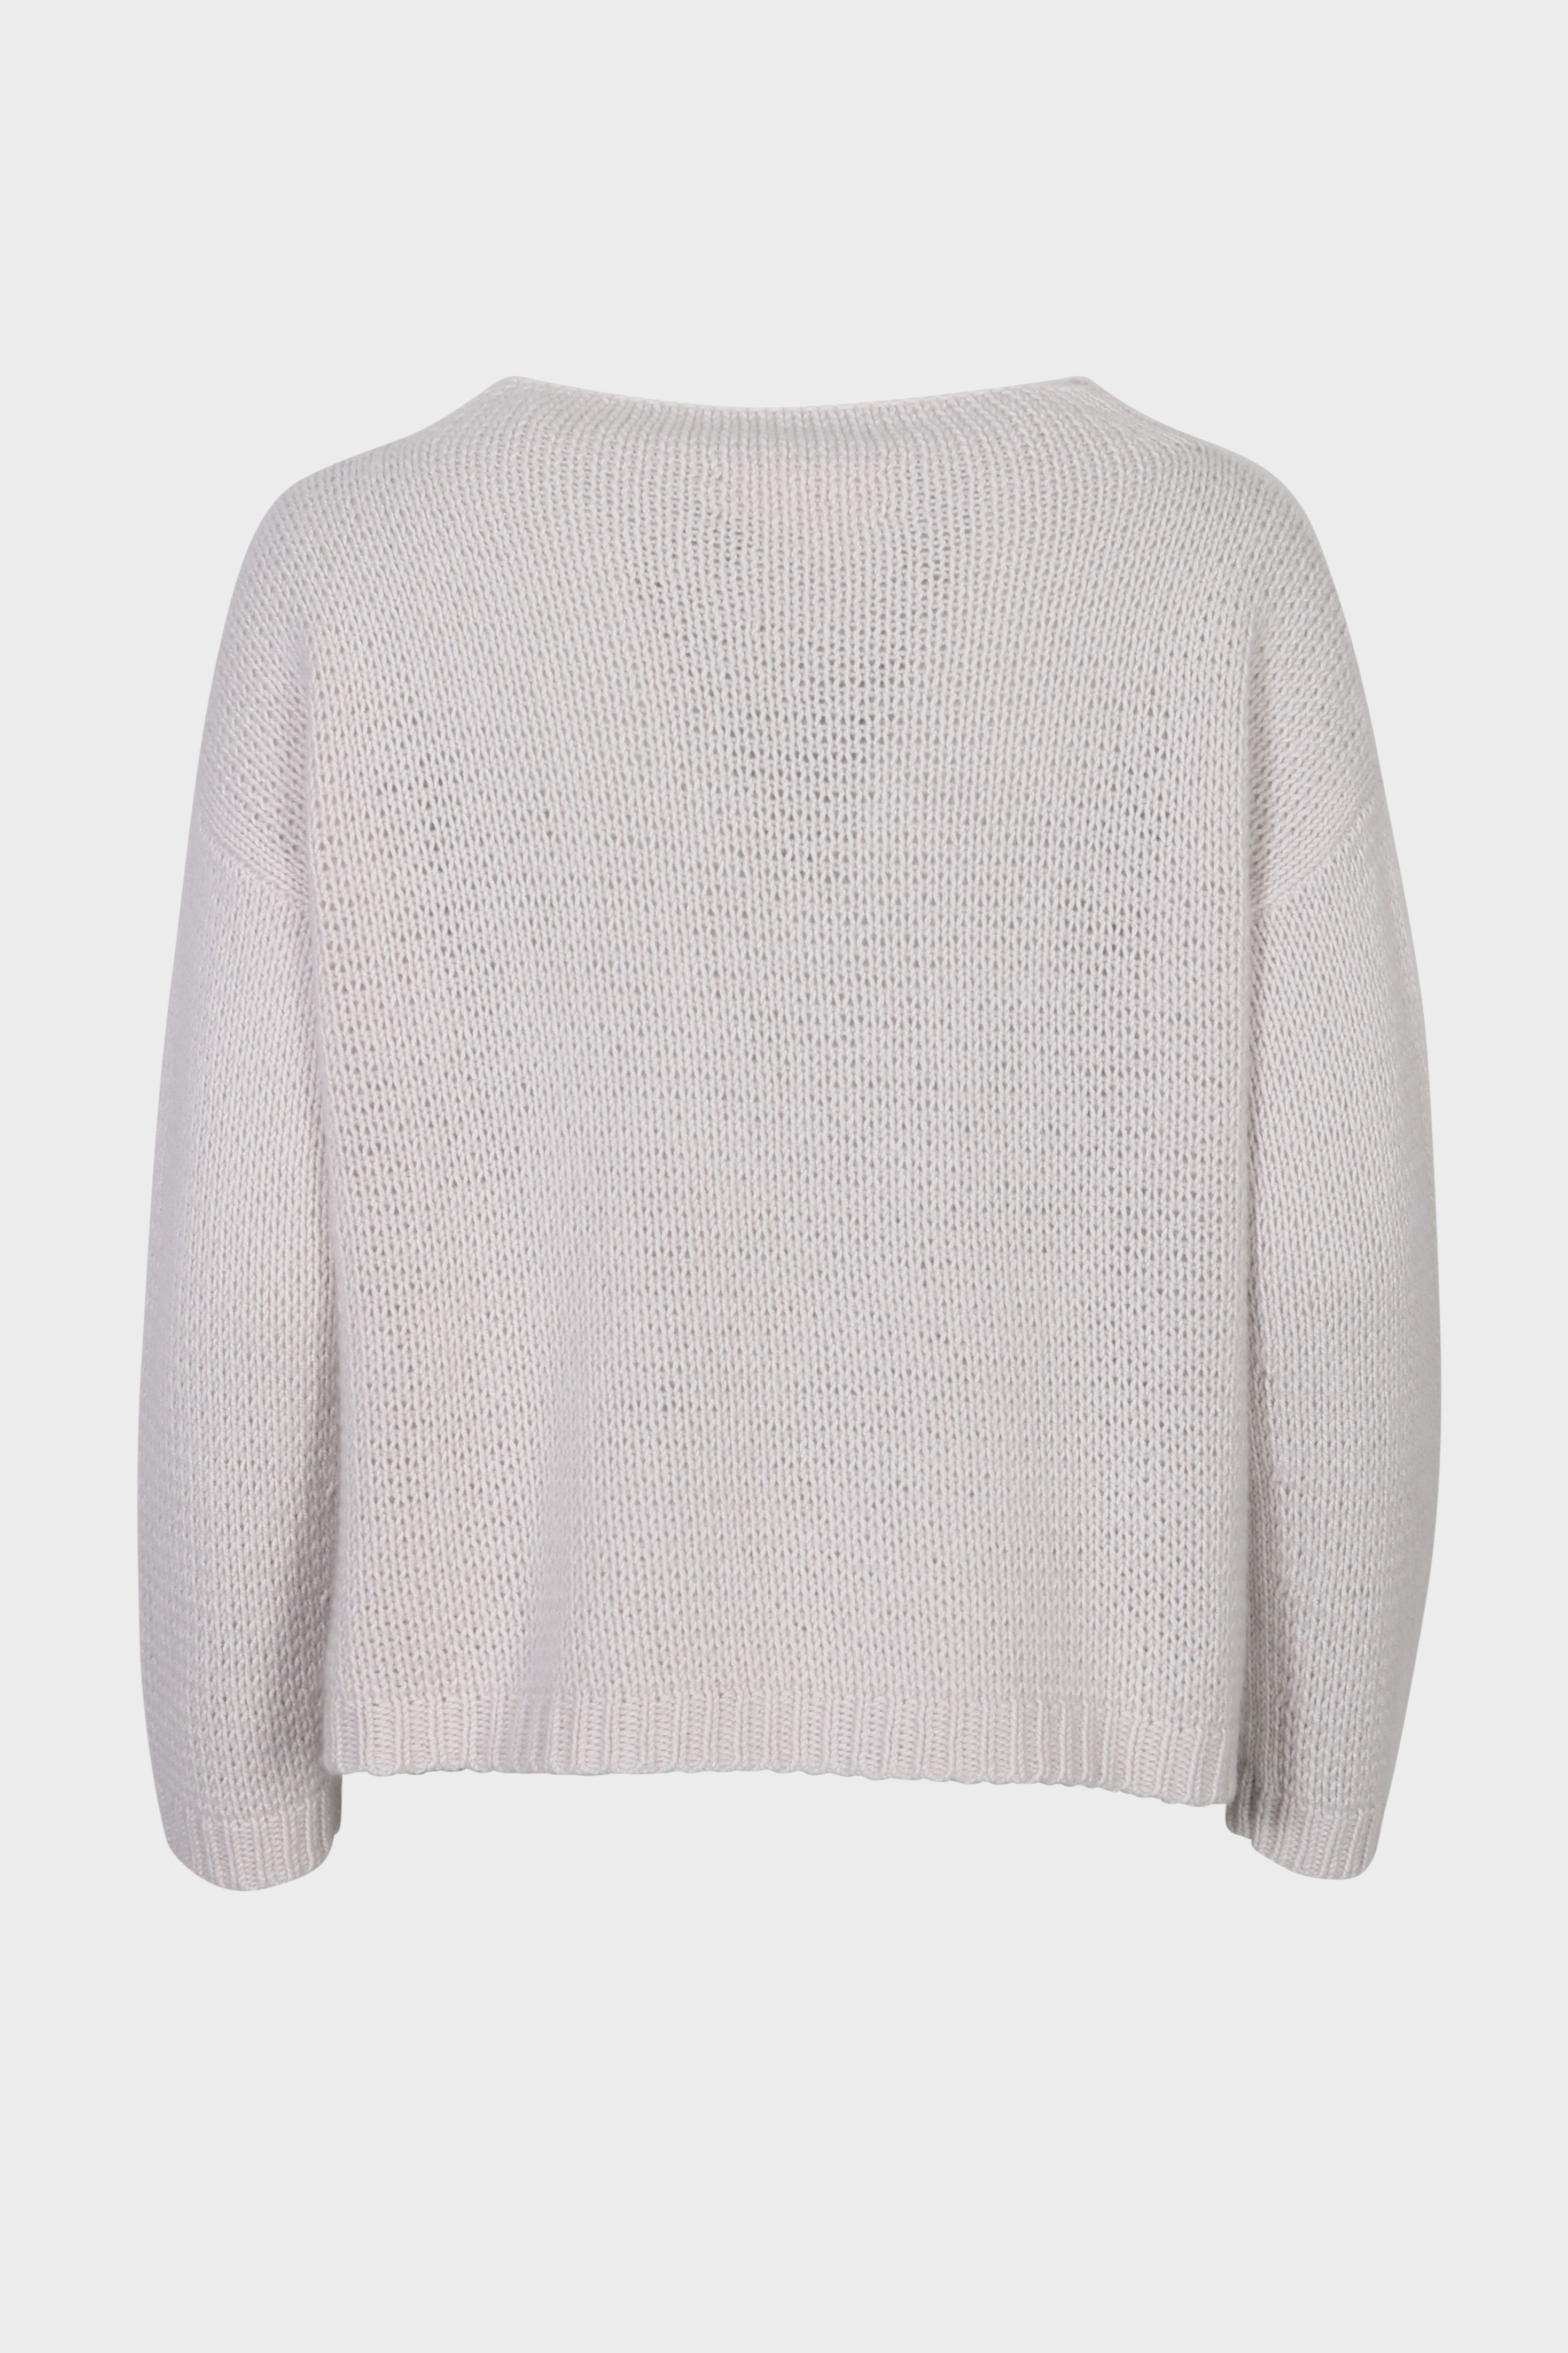 SMINFINITY Chilly Loose & Tight  Knit Pullover in Pebble XS/S